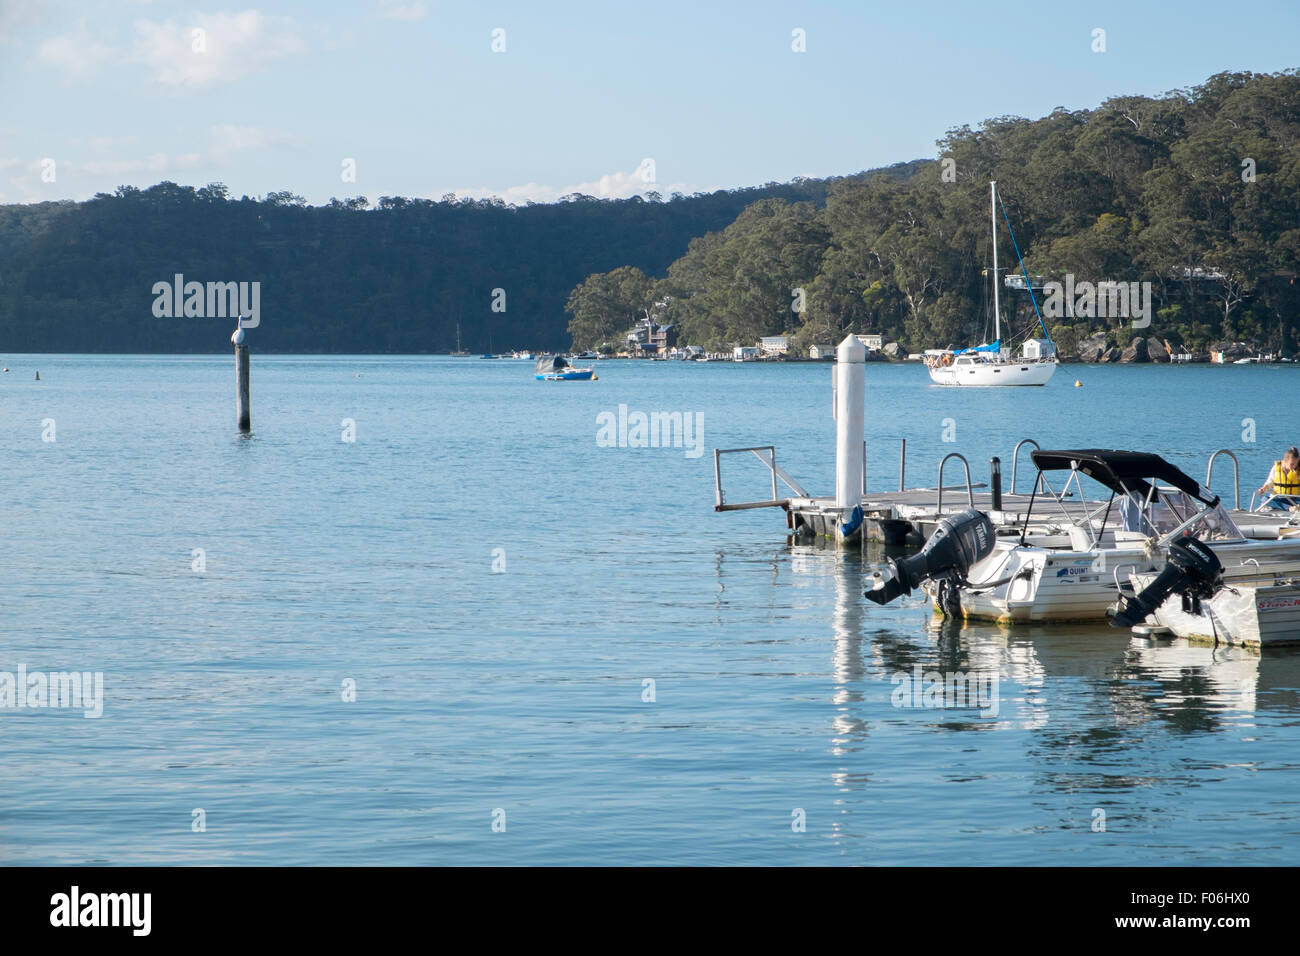 Hawkesbury river Brooklyn à New South Wales, Australie Banque D'Images